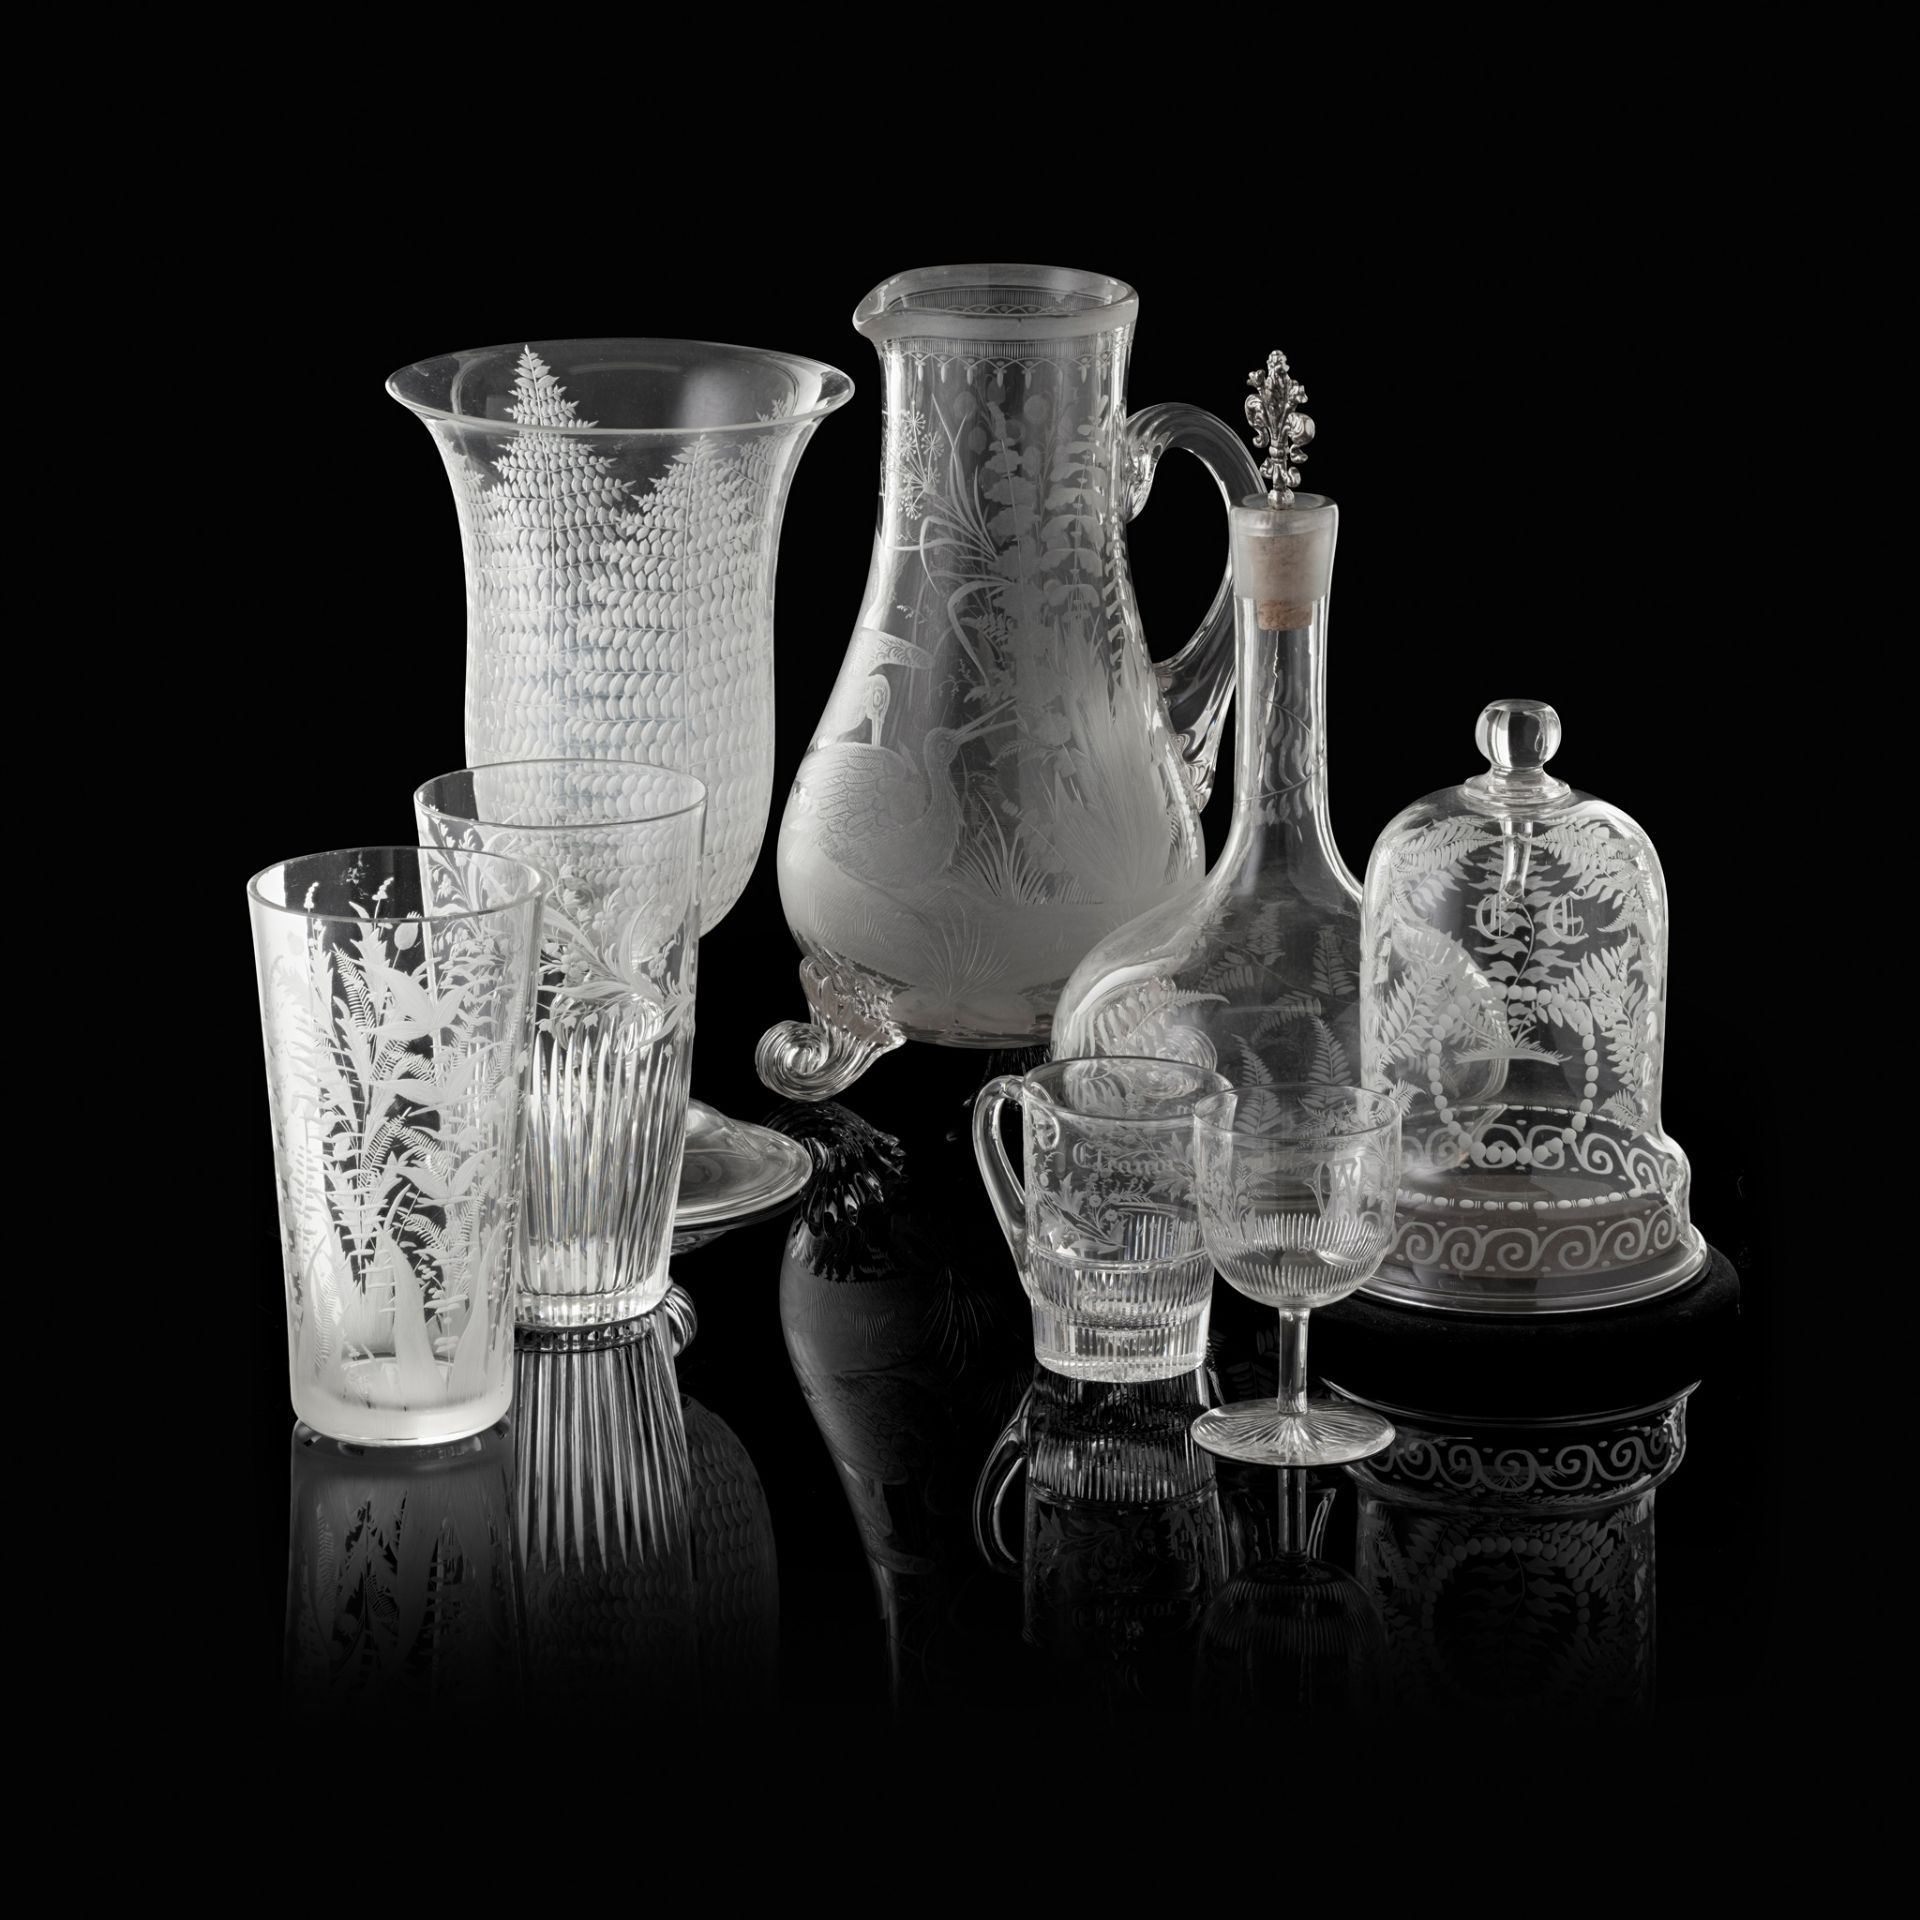 COLLECTION OF VICTORIAN ENGRAVED GLASSWARE 19TH CENTURY